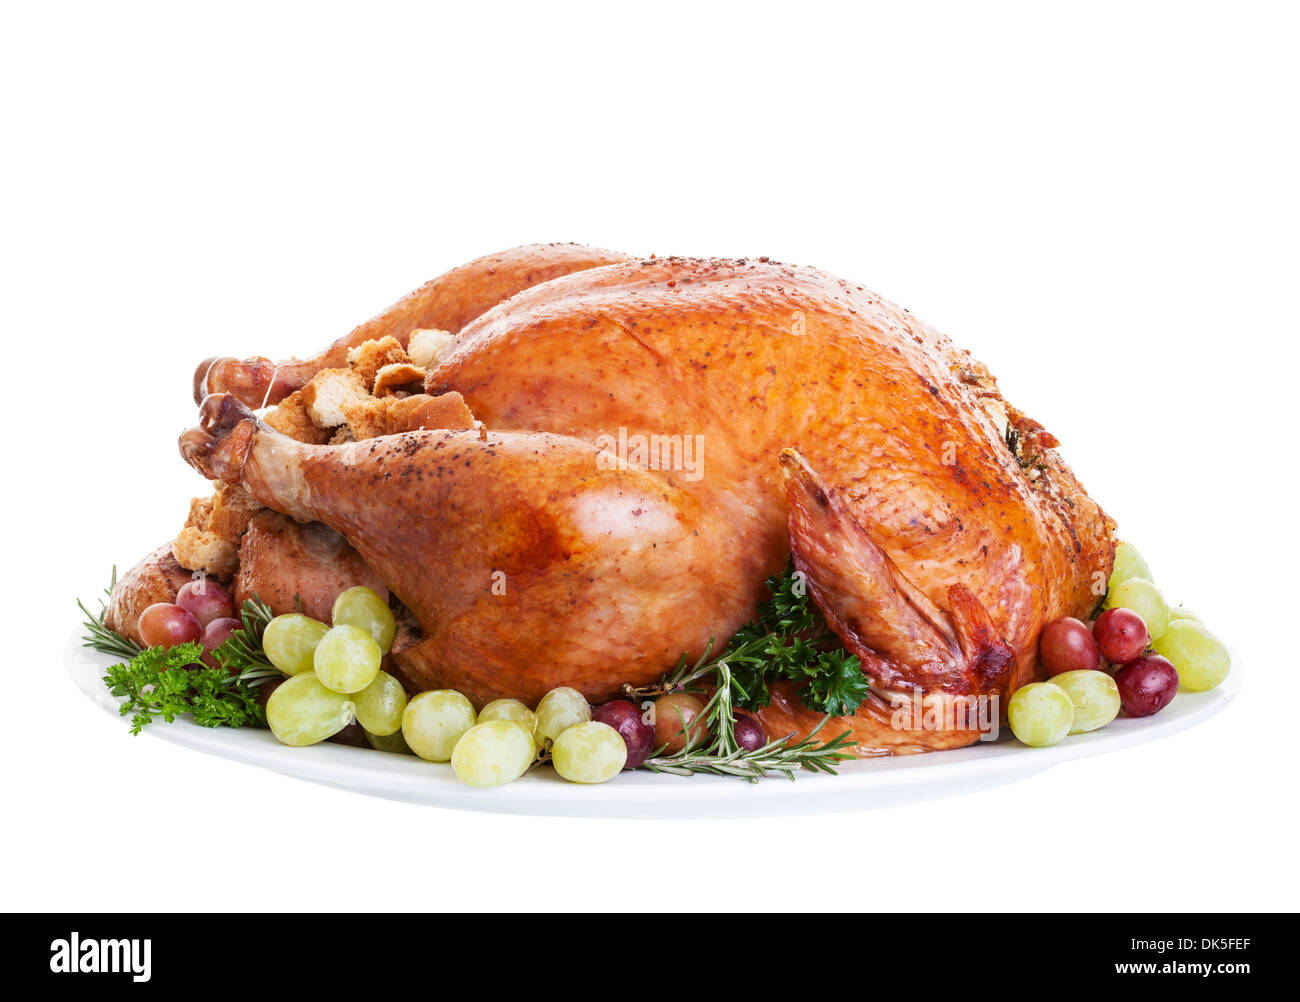 A large a stuffed turkey on a platter garnished with grapes. Stock Photo